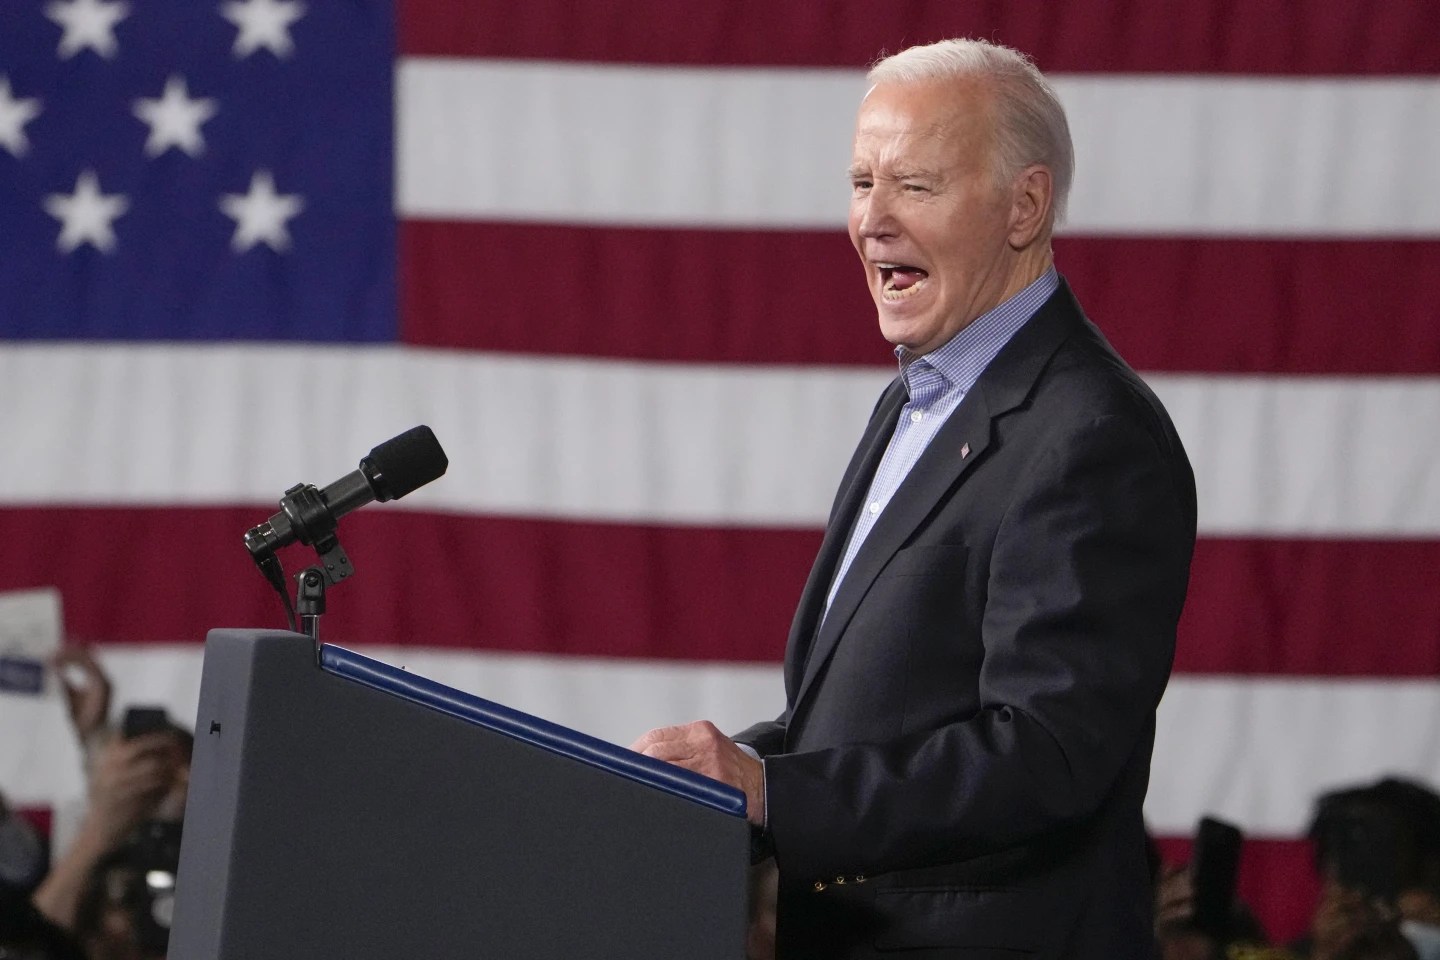 Biden and Trump issue dire warnings of the other, as a rematch comes into view in Georgia